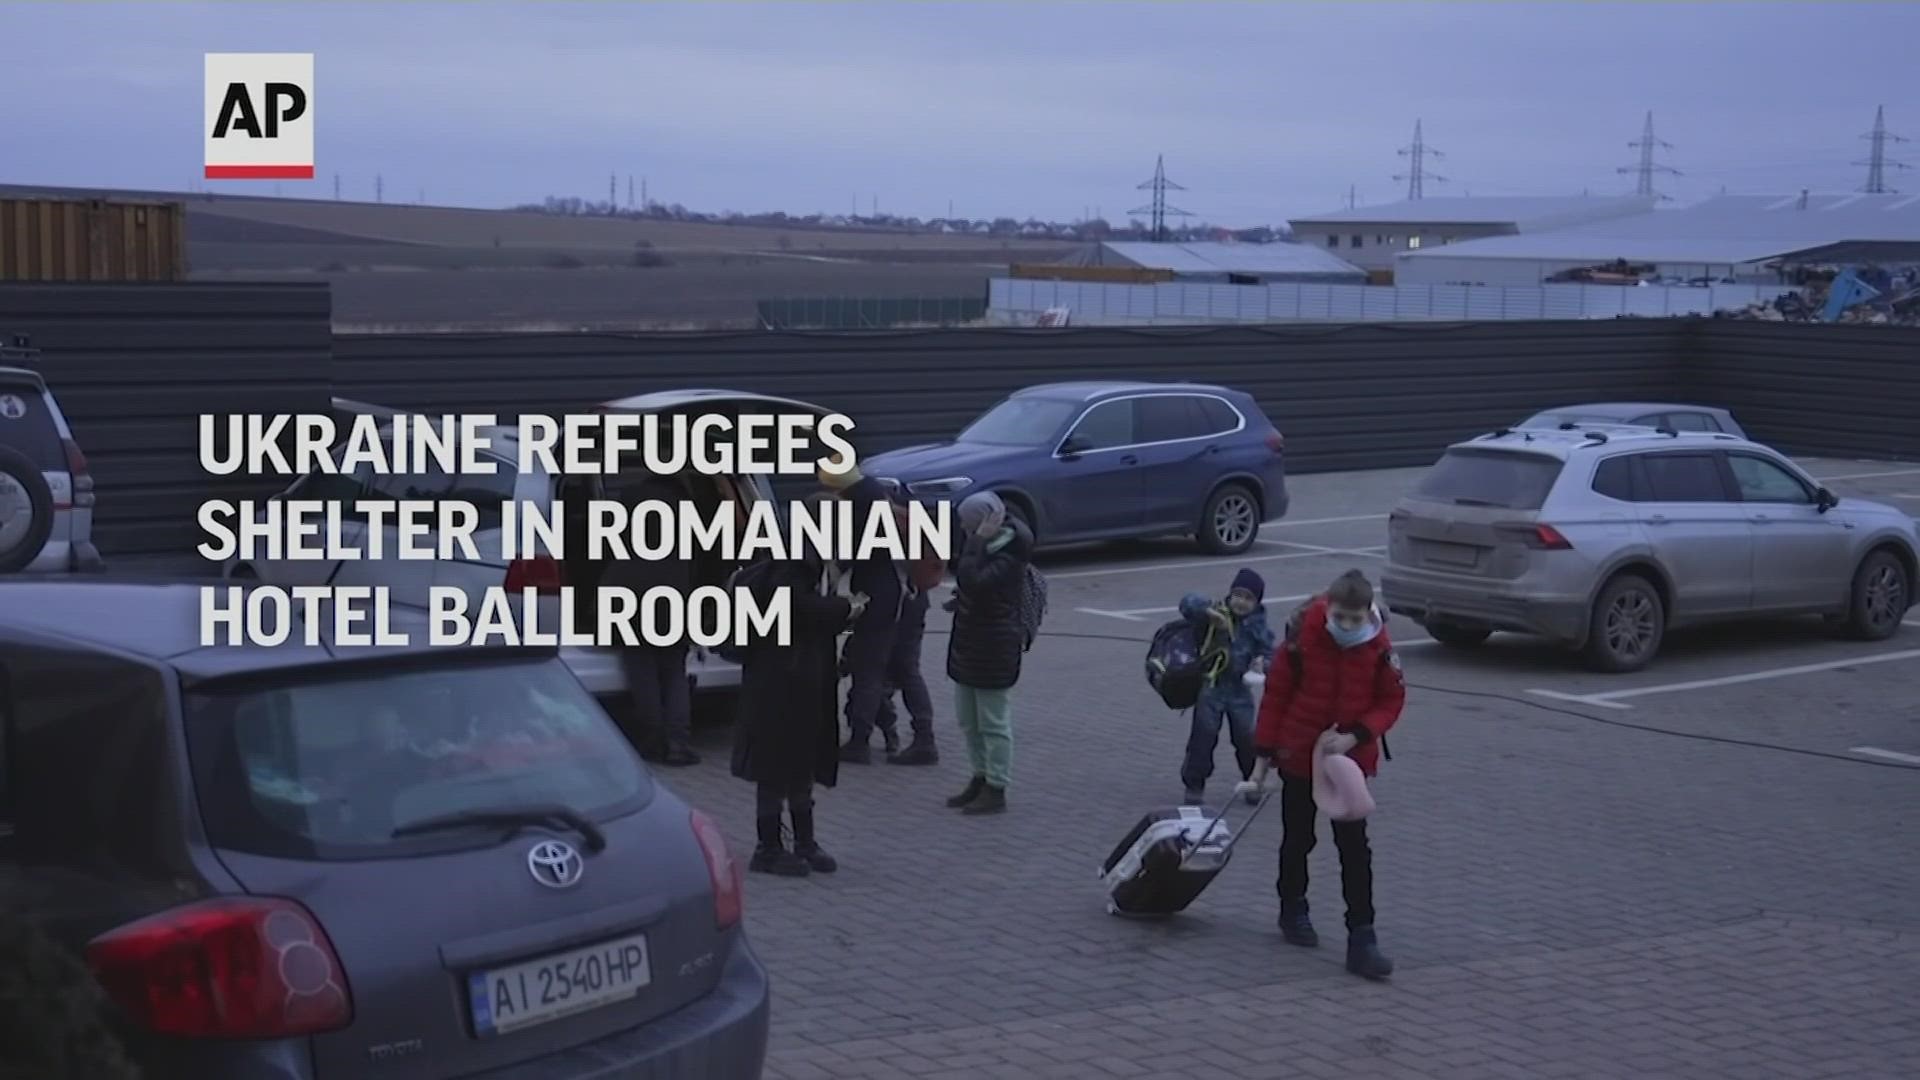 This four-star hotel in Romania once hosted weddings. Now it hosts refugees fleeing Russia's invasion.